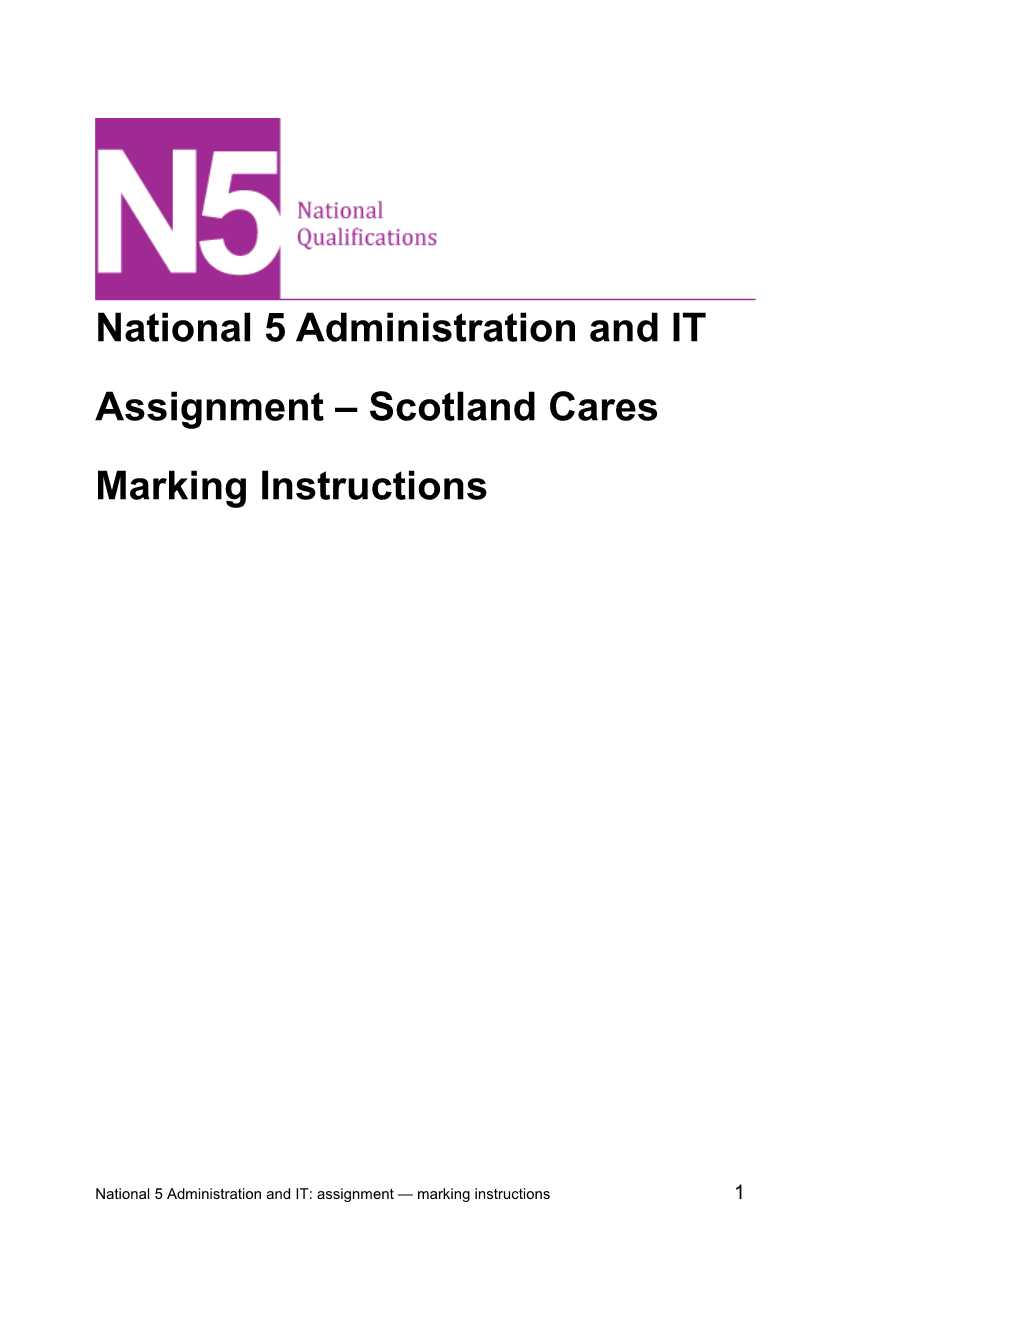 National 5 Administration and IT